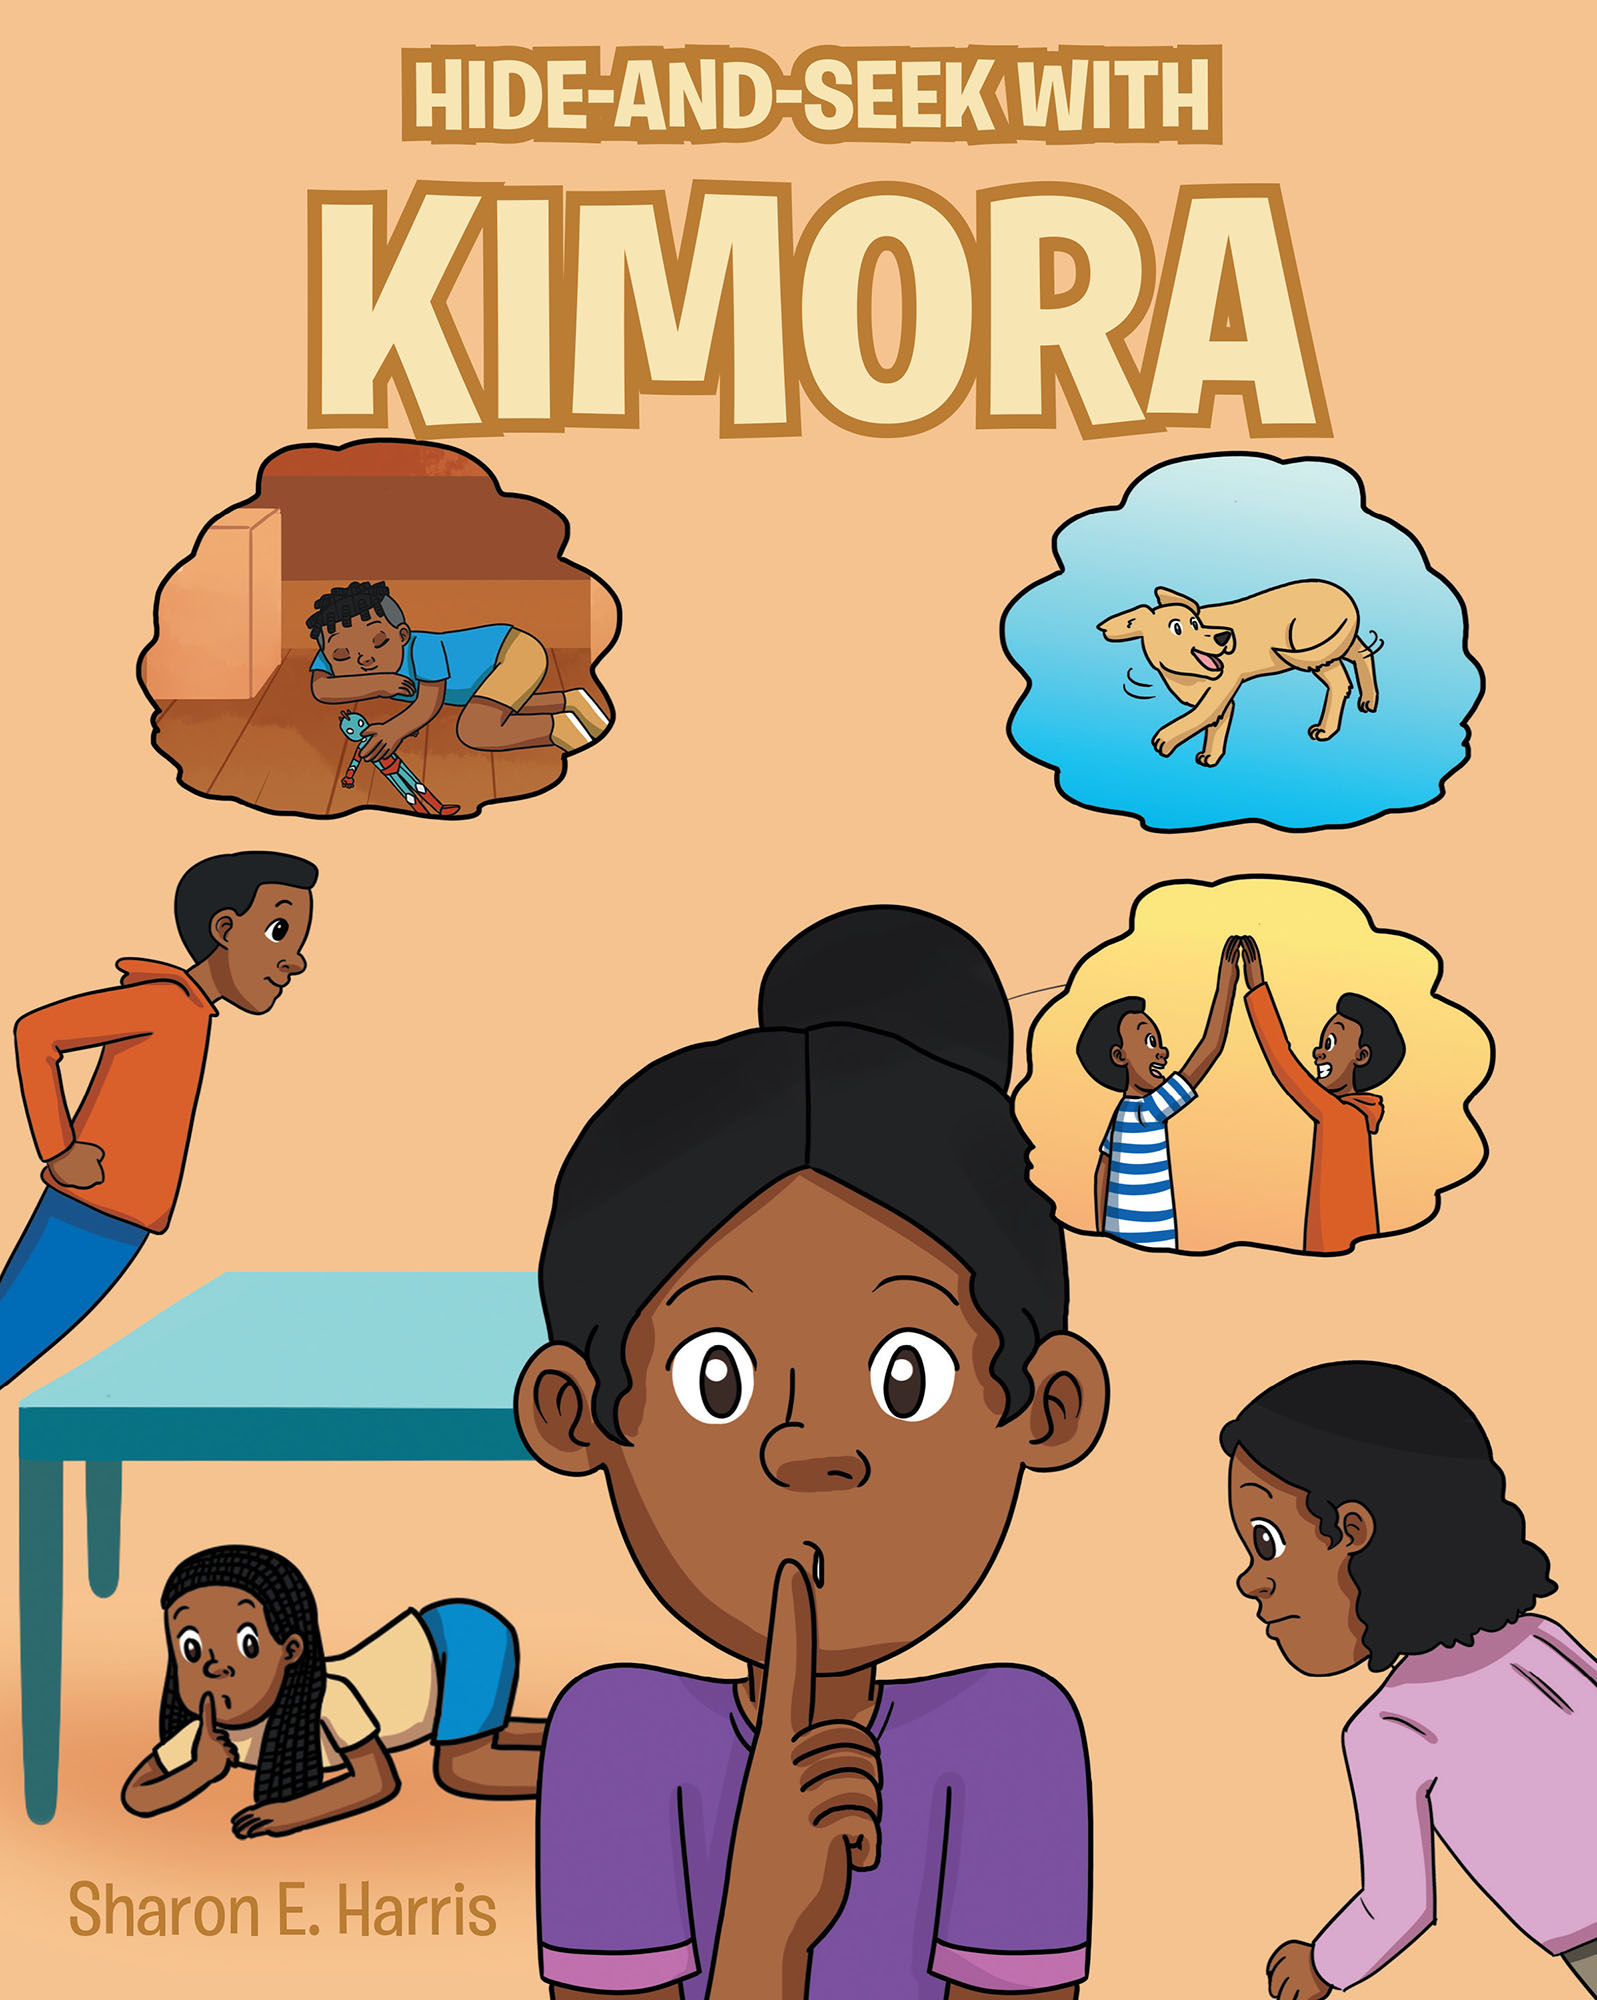 Author Sharon E. Harris’s New Book, "Hide and Seek with Kimora," is a Delightful Children’s Story That Celebrates the Importance of Children Playing and Learning Together